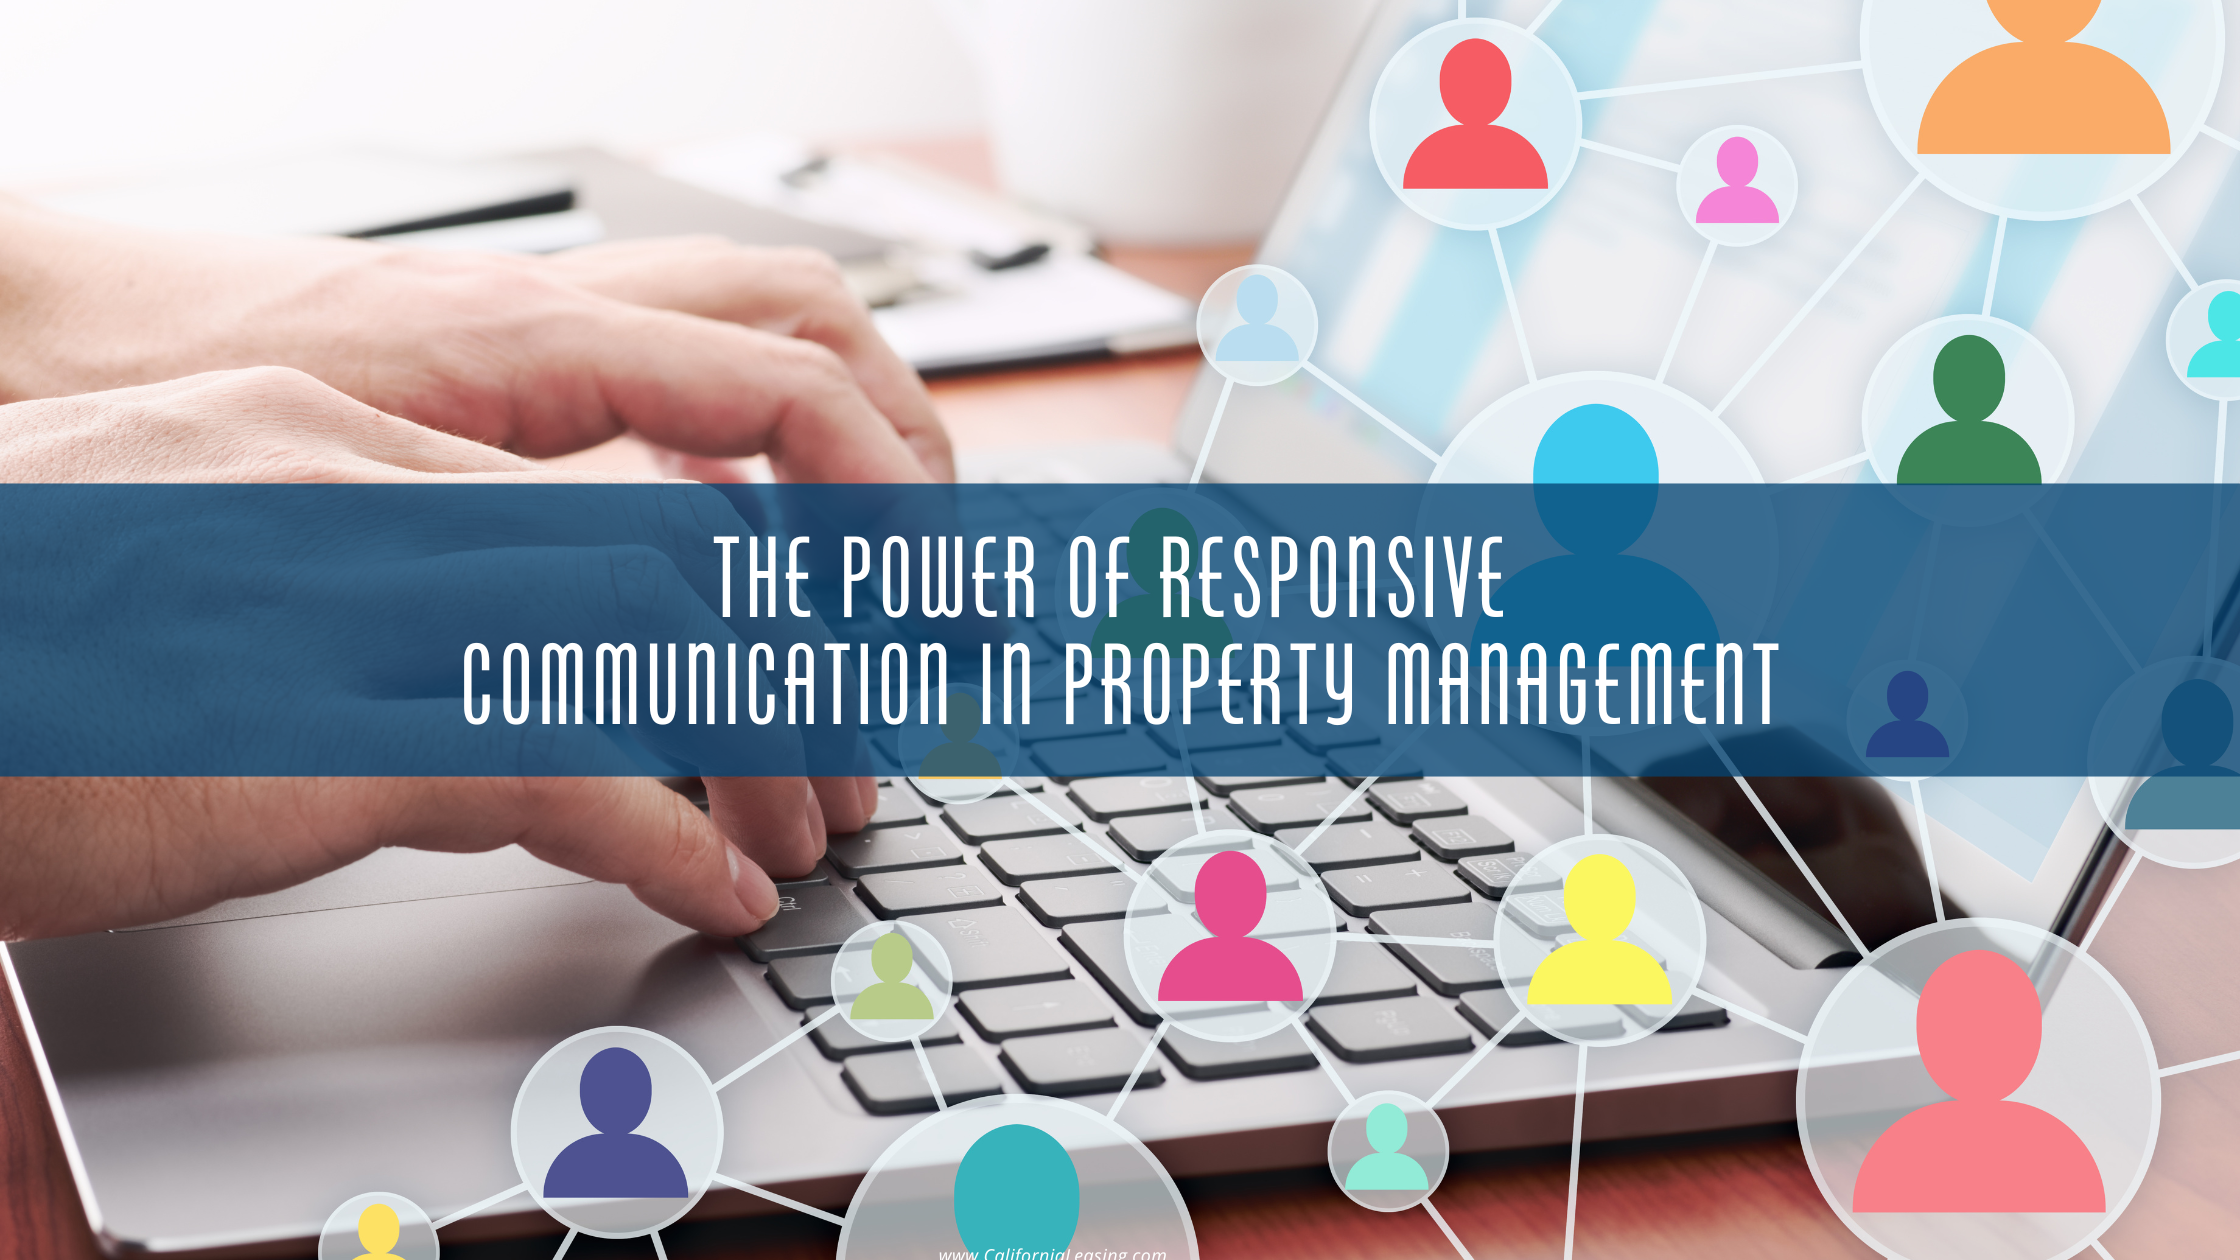 The Power of Responsive Communication in Property Management a blog post by California leasing